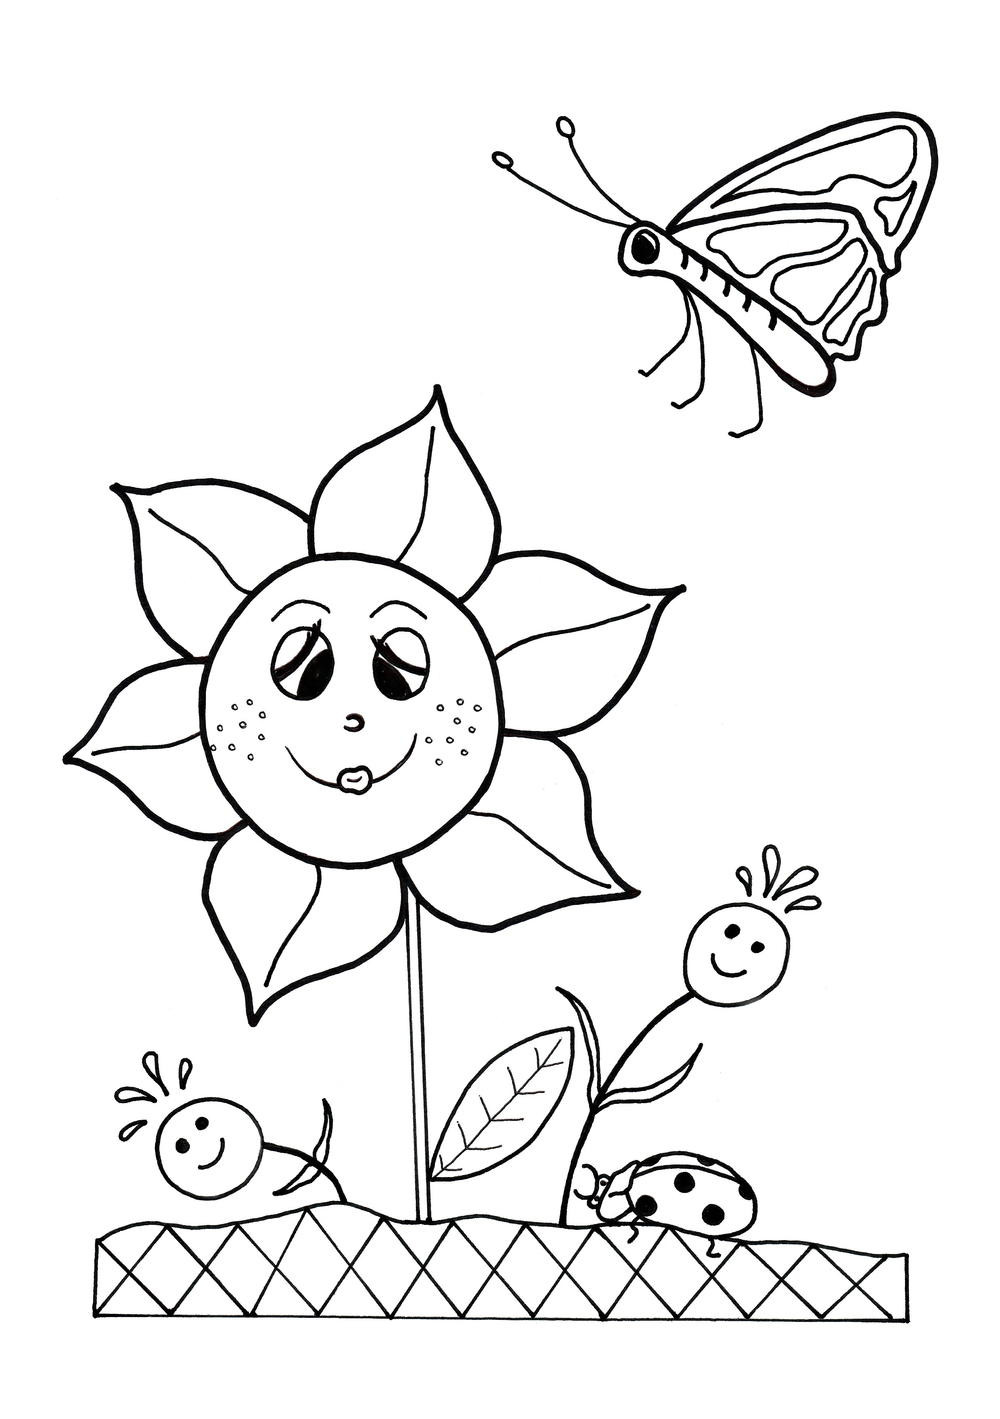 Printable Flower Coloring Pages For Kids
 Dancing Flowers Spring Coloring Sheet